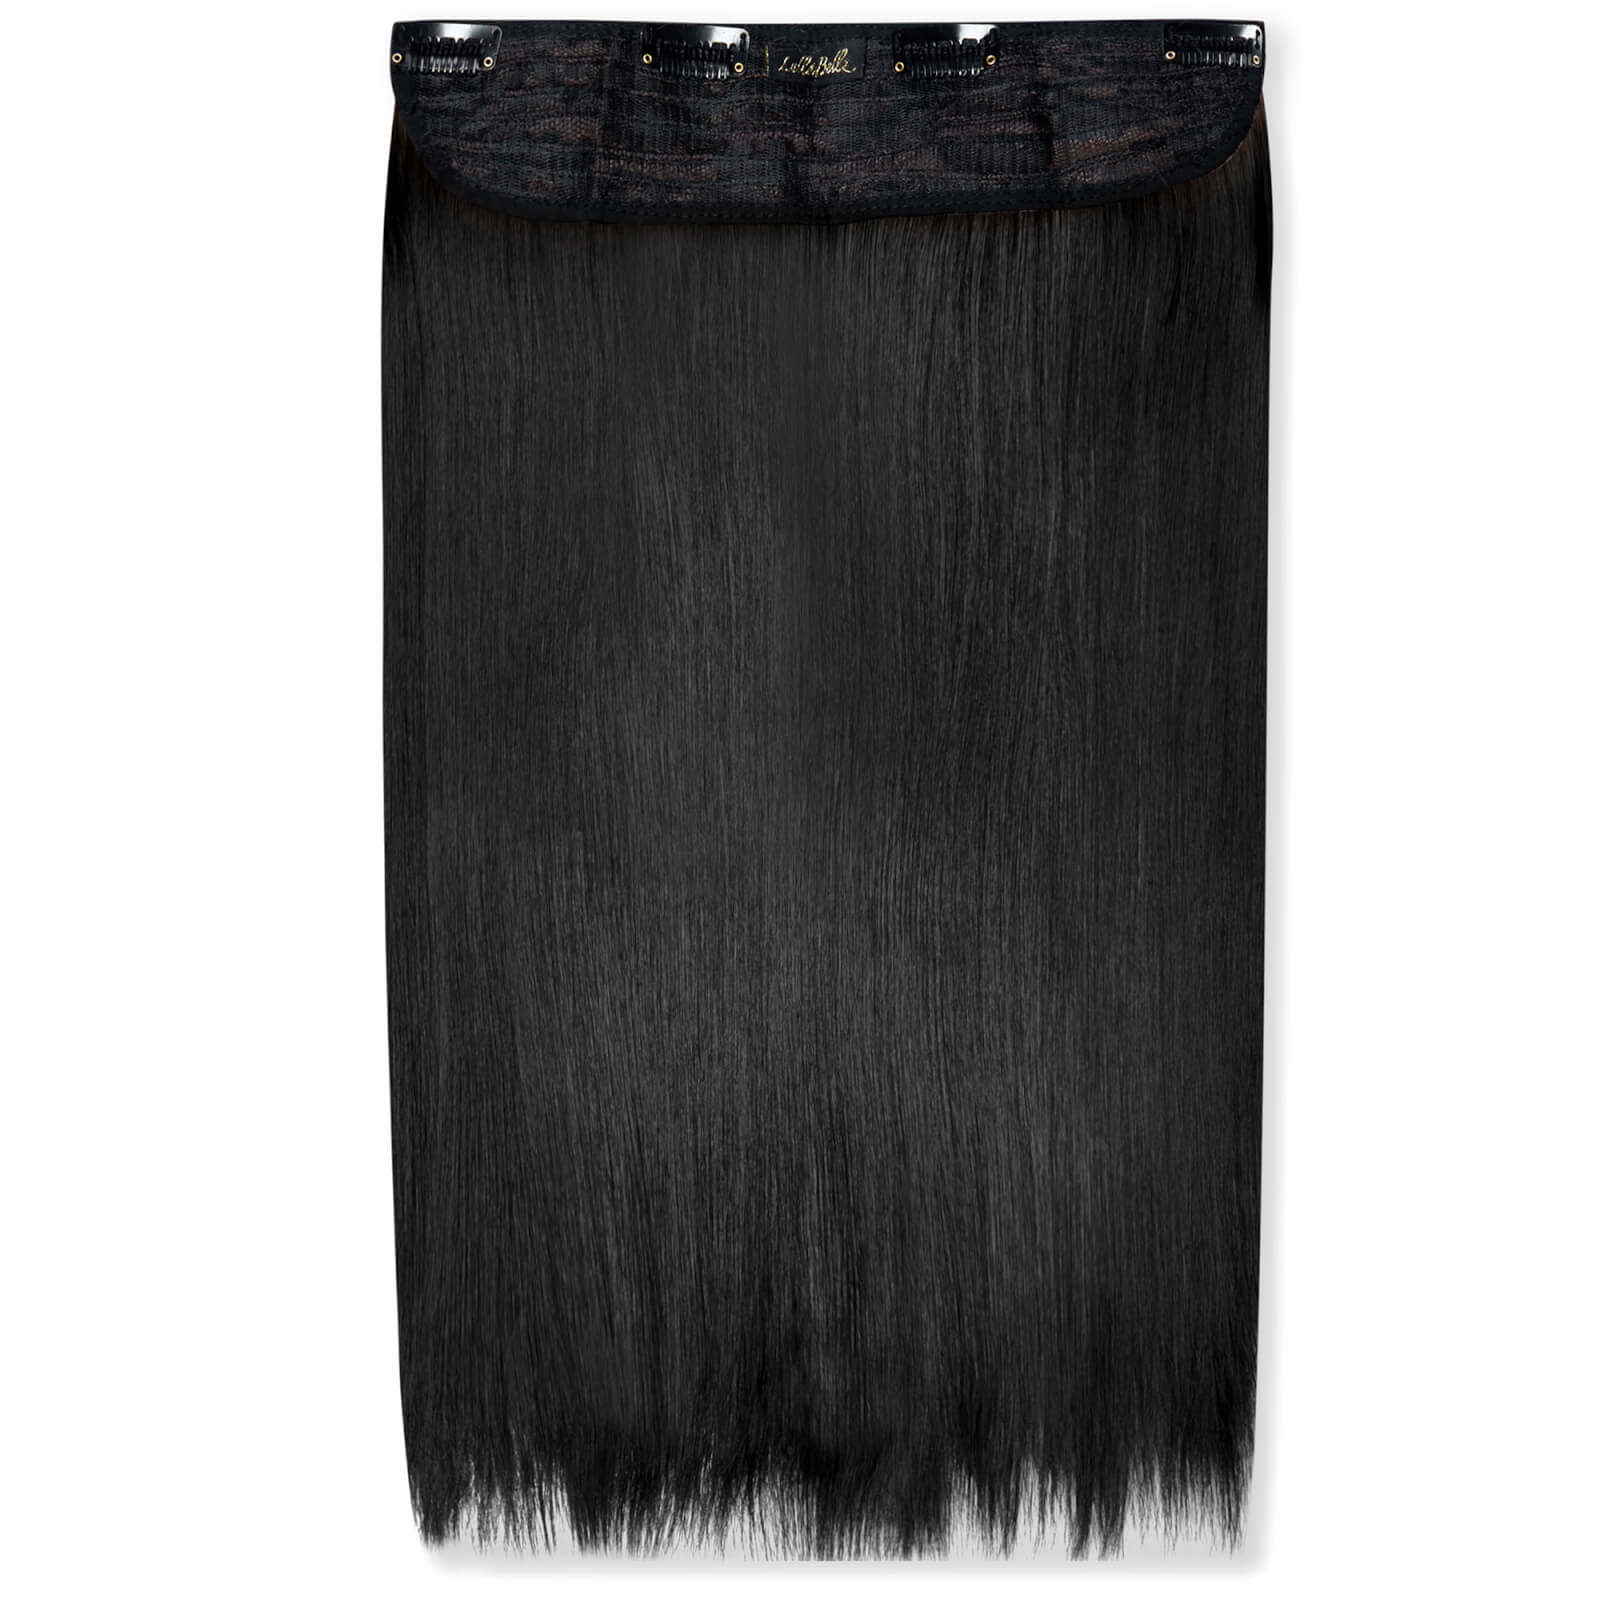 LullaBellz Thick 18 1-Piece Straight Clip in Hair Extensions (Various Colours) - Natural Black